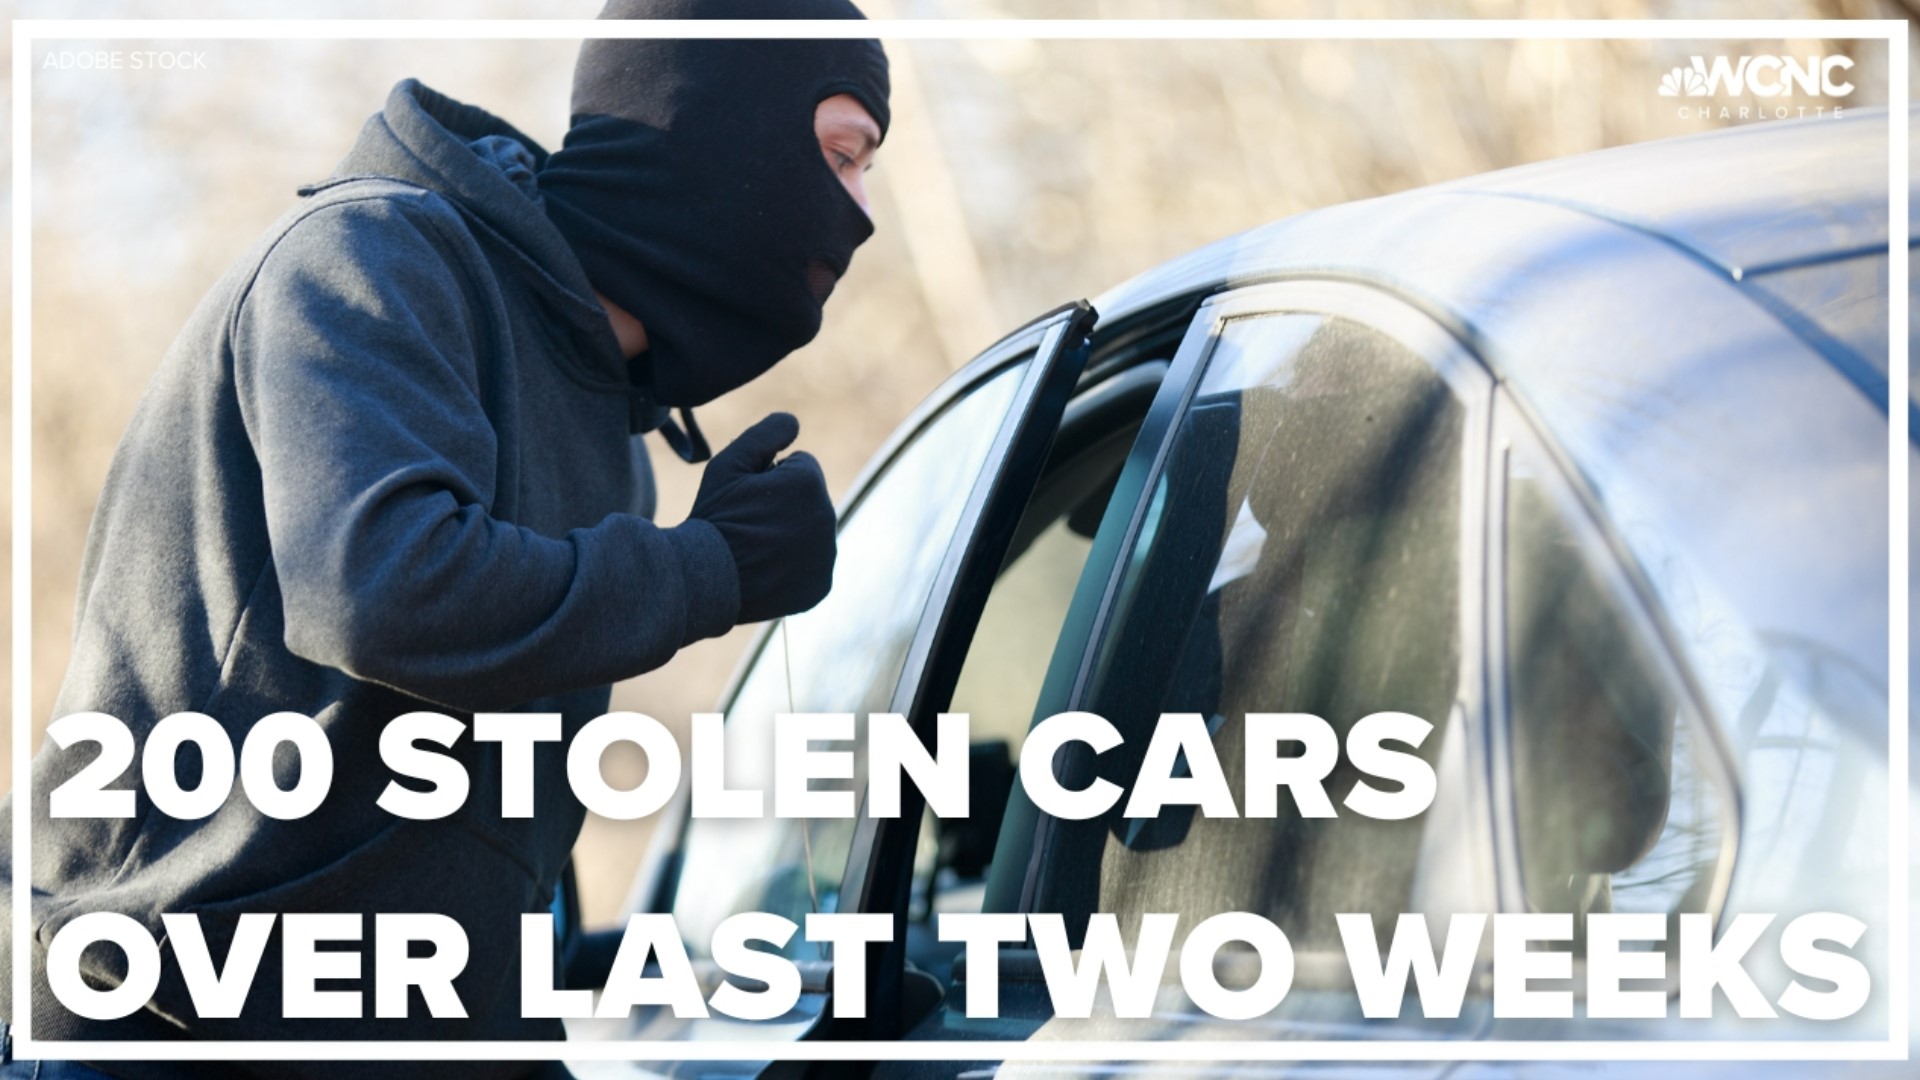 You should always lock your vehicle, keep your keys in your possession and conceal any valuables from plain sight, police say.